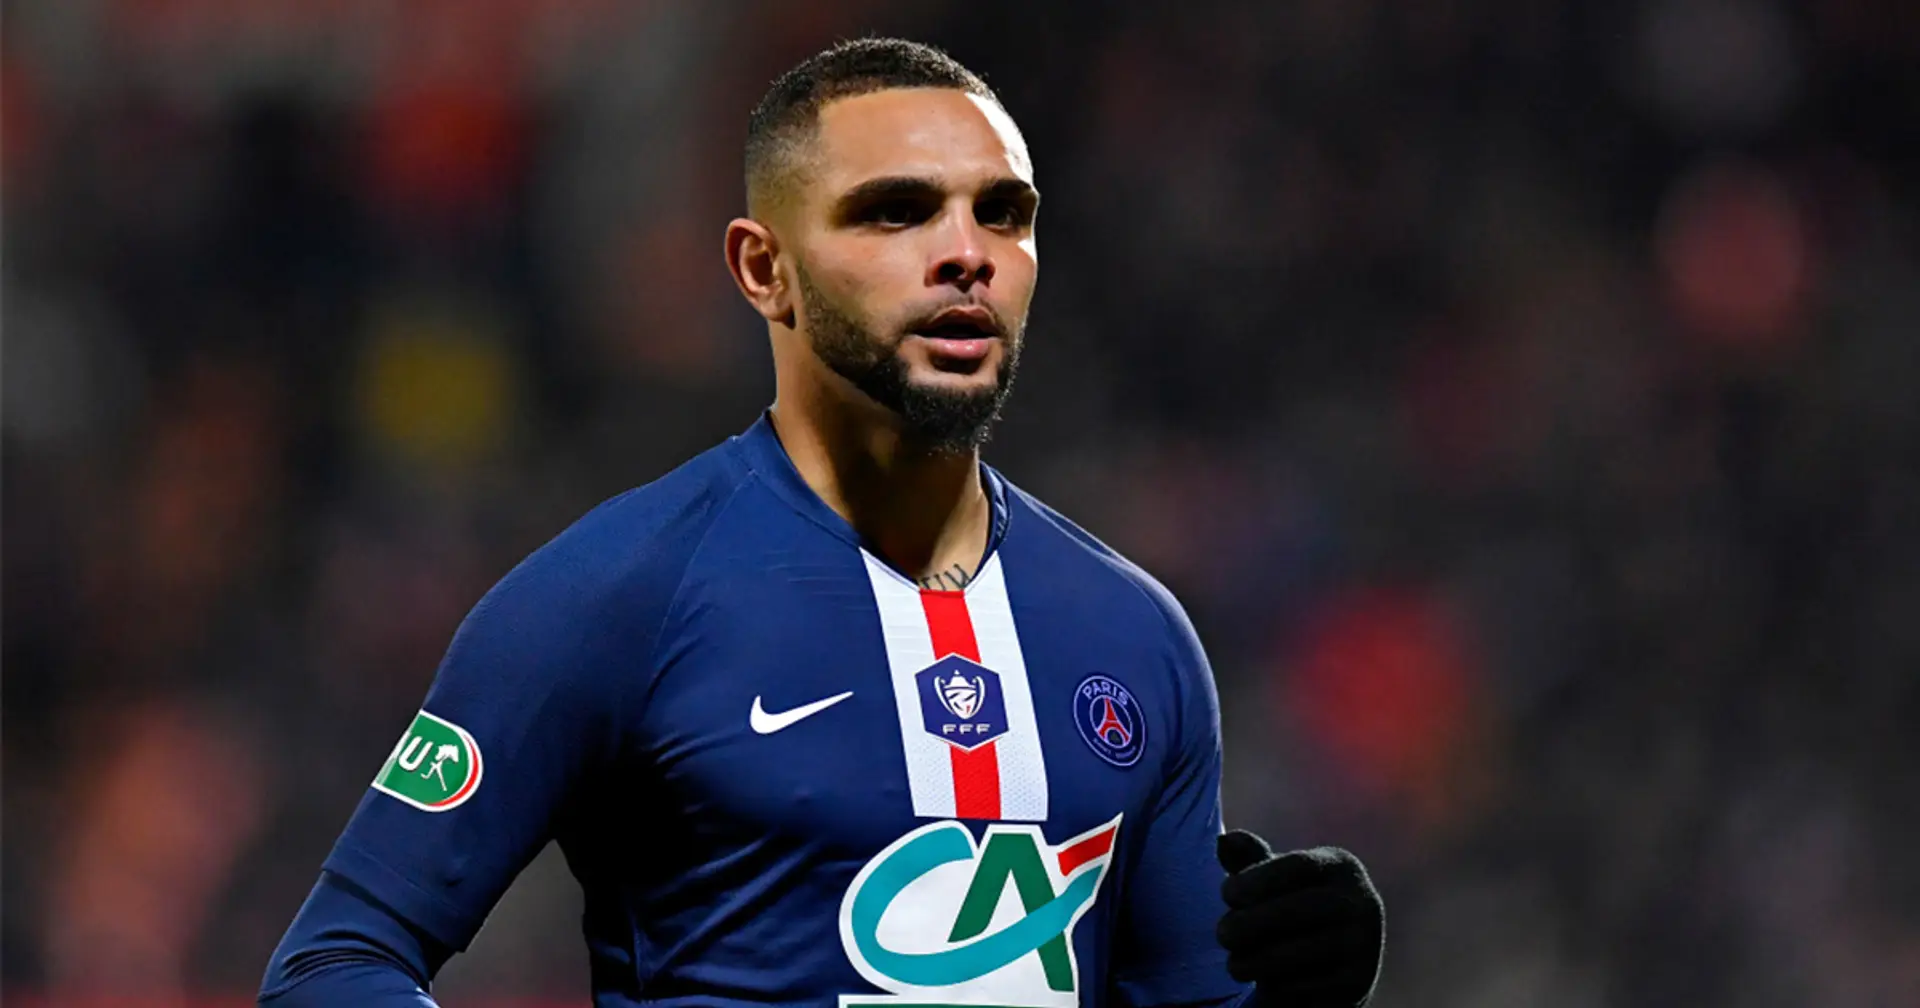 Pending free agent Kurzawa has 'interesting offer' from Arsenal but holds out for Barcelona